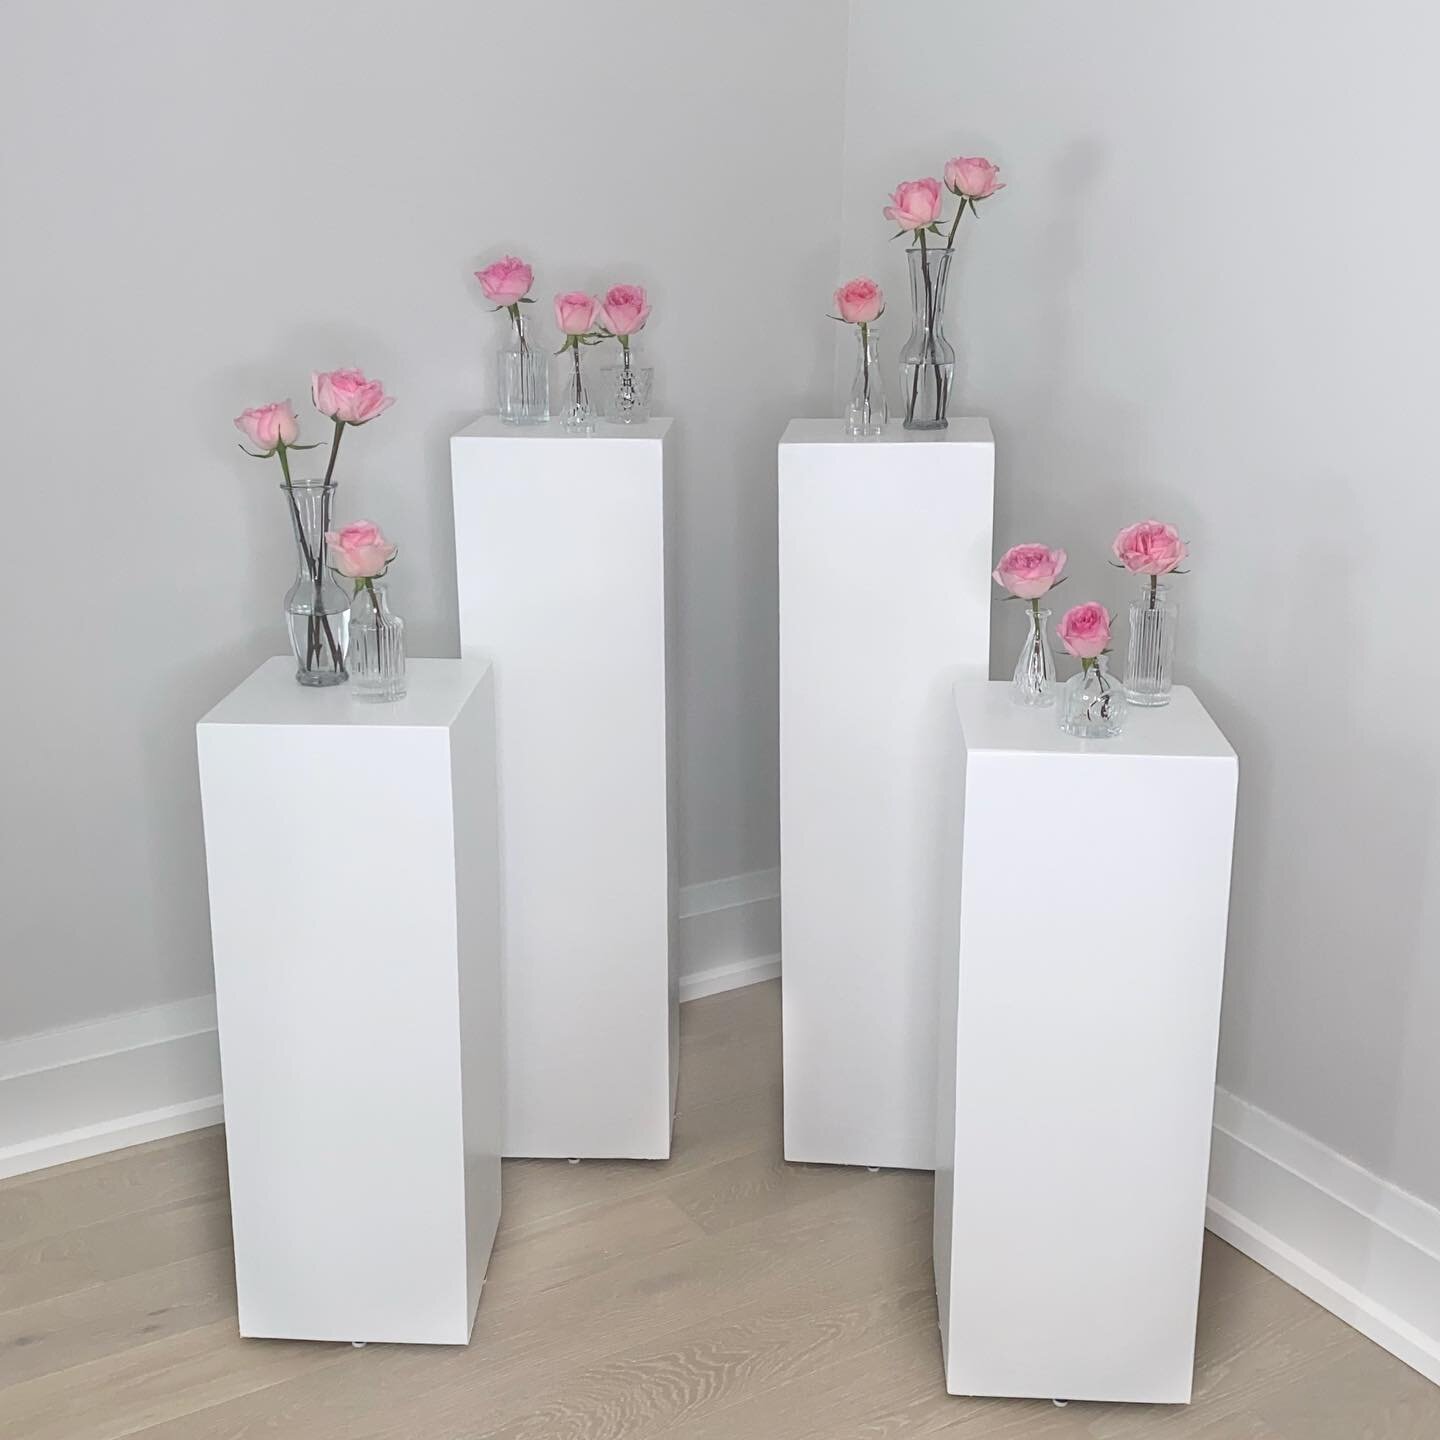 Introducing these gorgeous white plinths to our rental collection - what should we name them?! ✨🌸

#decorrentals #eventrentals #weddingdecor #glasstablenumbers #napkinrentals #chargerrentals #tablesetting #vaughaneventrentals #weddingrentals #kingci